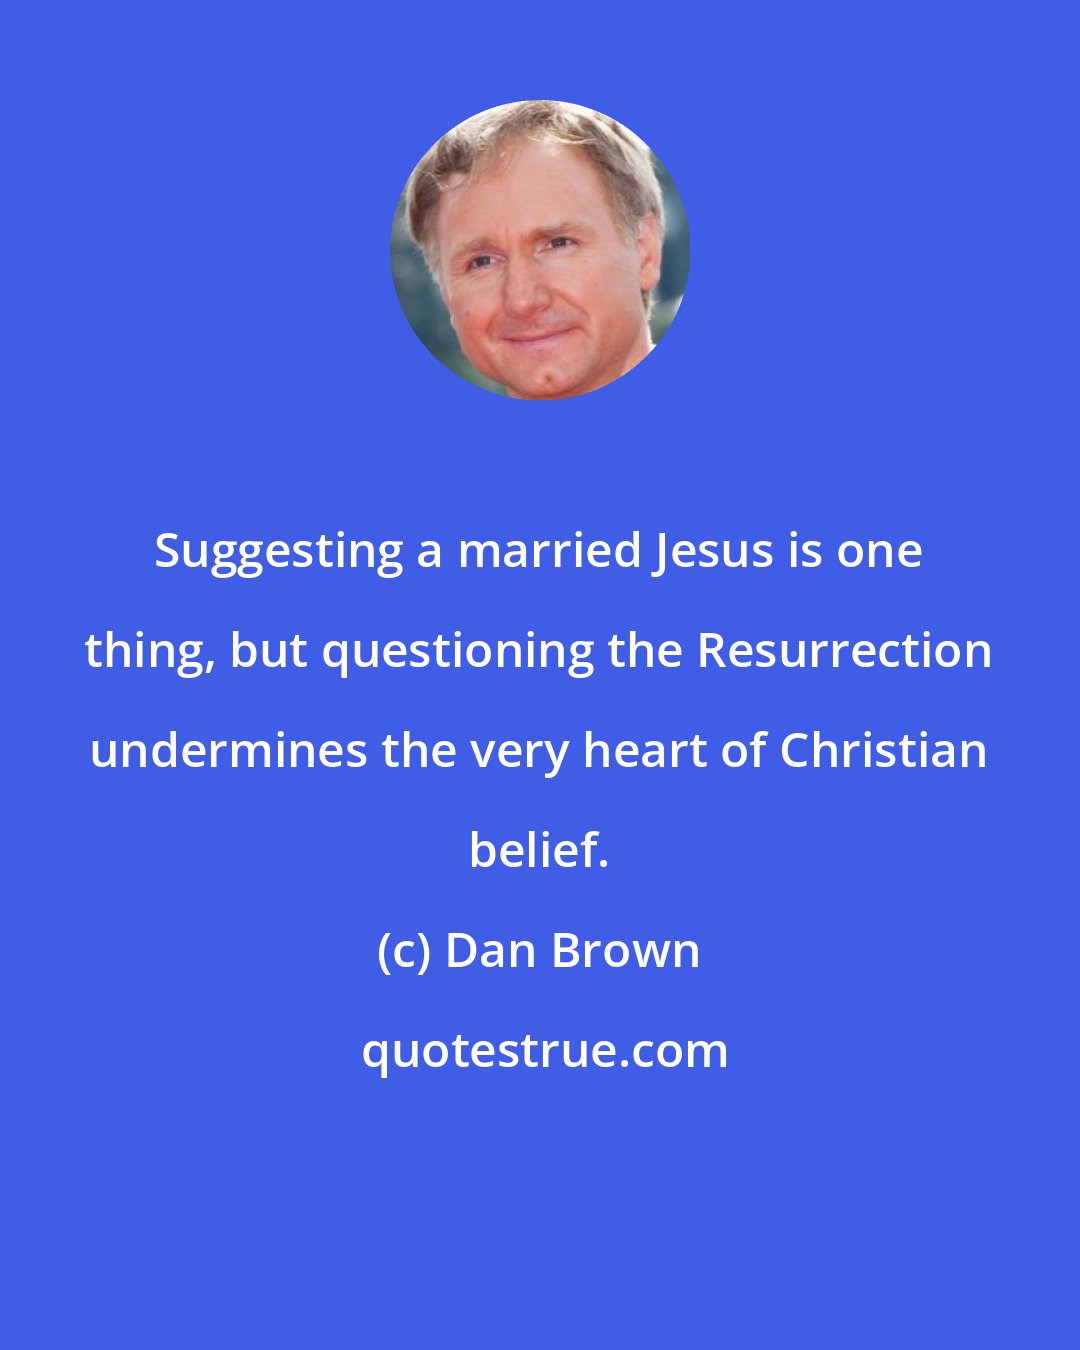 Dan Brown: Suggesting a married Jesus is one thing, but questioning the Resurrection undermines the very heart of Christian belief.